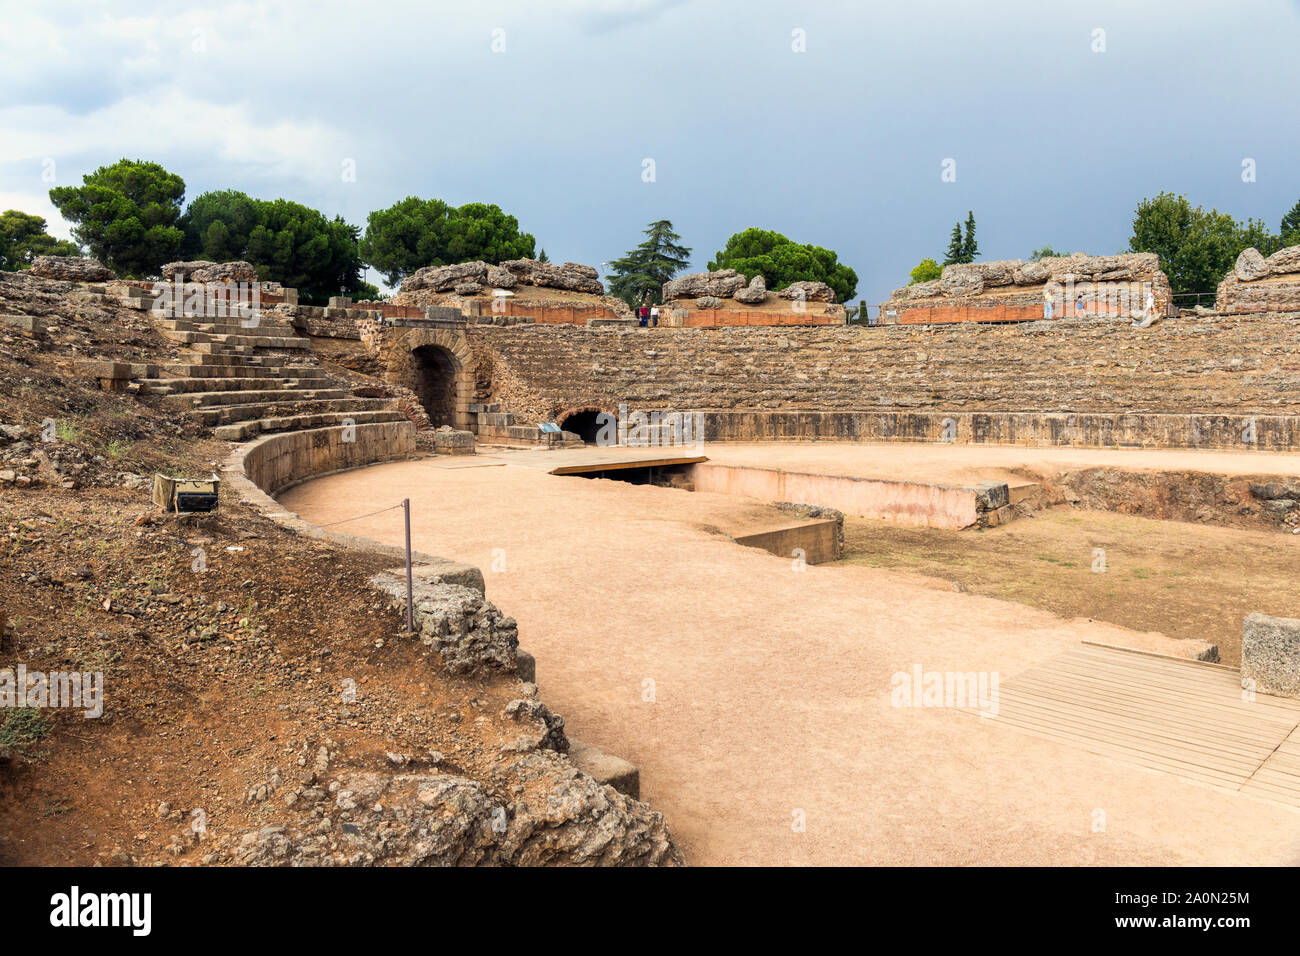 The Roman amphitheatre, Merida, Badajoz Province, Extremadura, Spain.  The amphitheatre was inaugurated in 8 BC.  It is part of the Archaeological En Stock Photo